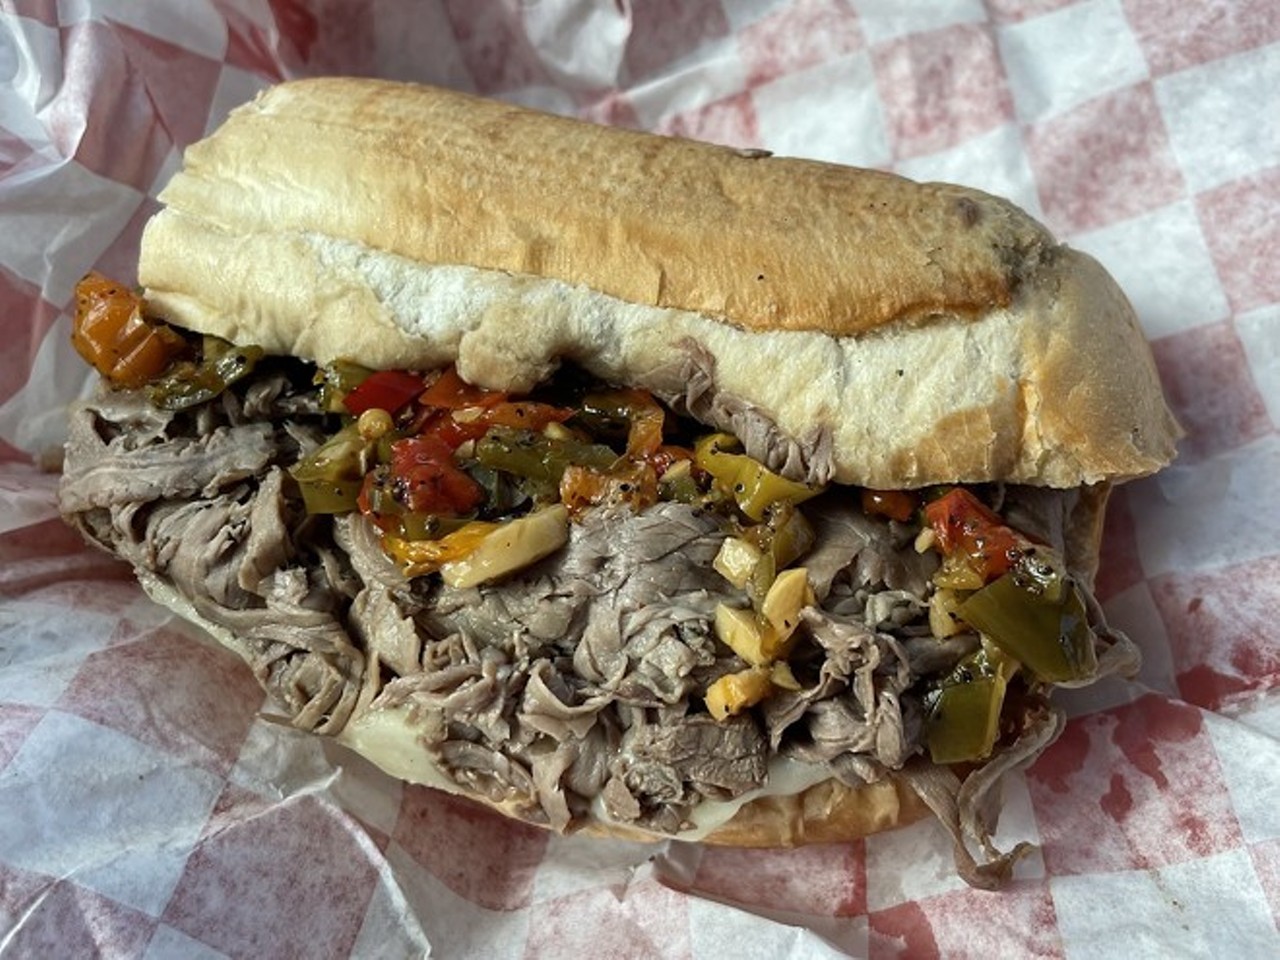  Au Jus 
5875 Broadview Rd., Parma
As Scene's Doug Trattner noted in his recent review, "I can’t imagine how much meat is wedged into the “large” Italian beef sandwich given that my “regular” ($9.25) was overflowing with tender, thin-shaved beef. Order it “dipped” and it will be baptized in a font of the namesake au jus. Otherwise, sandwiches come with a large tub of the thin gravy for self-dipping. Make sure to add an order of the giardiniera ($1.10) – or better yet, the spicy-hot giardiniera. Au Jus also features a streamlined menu of “state fair-style” sausage and pepper hoagies, a few pressed sandwiches, fresh-cut fries and exceptional batter-dipped onion rings ($3.99)."